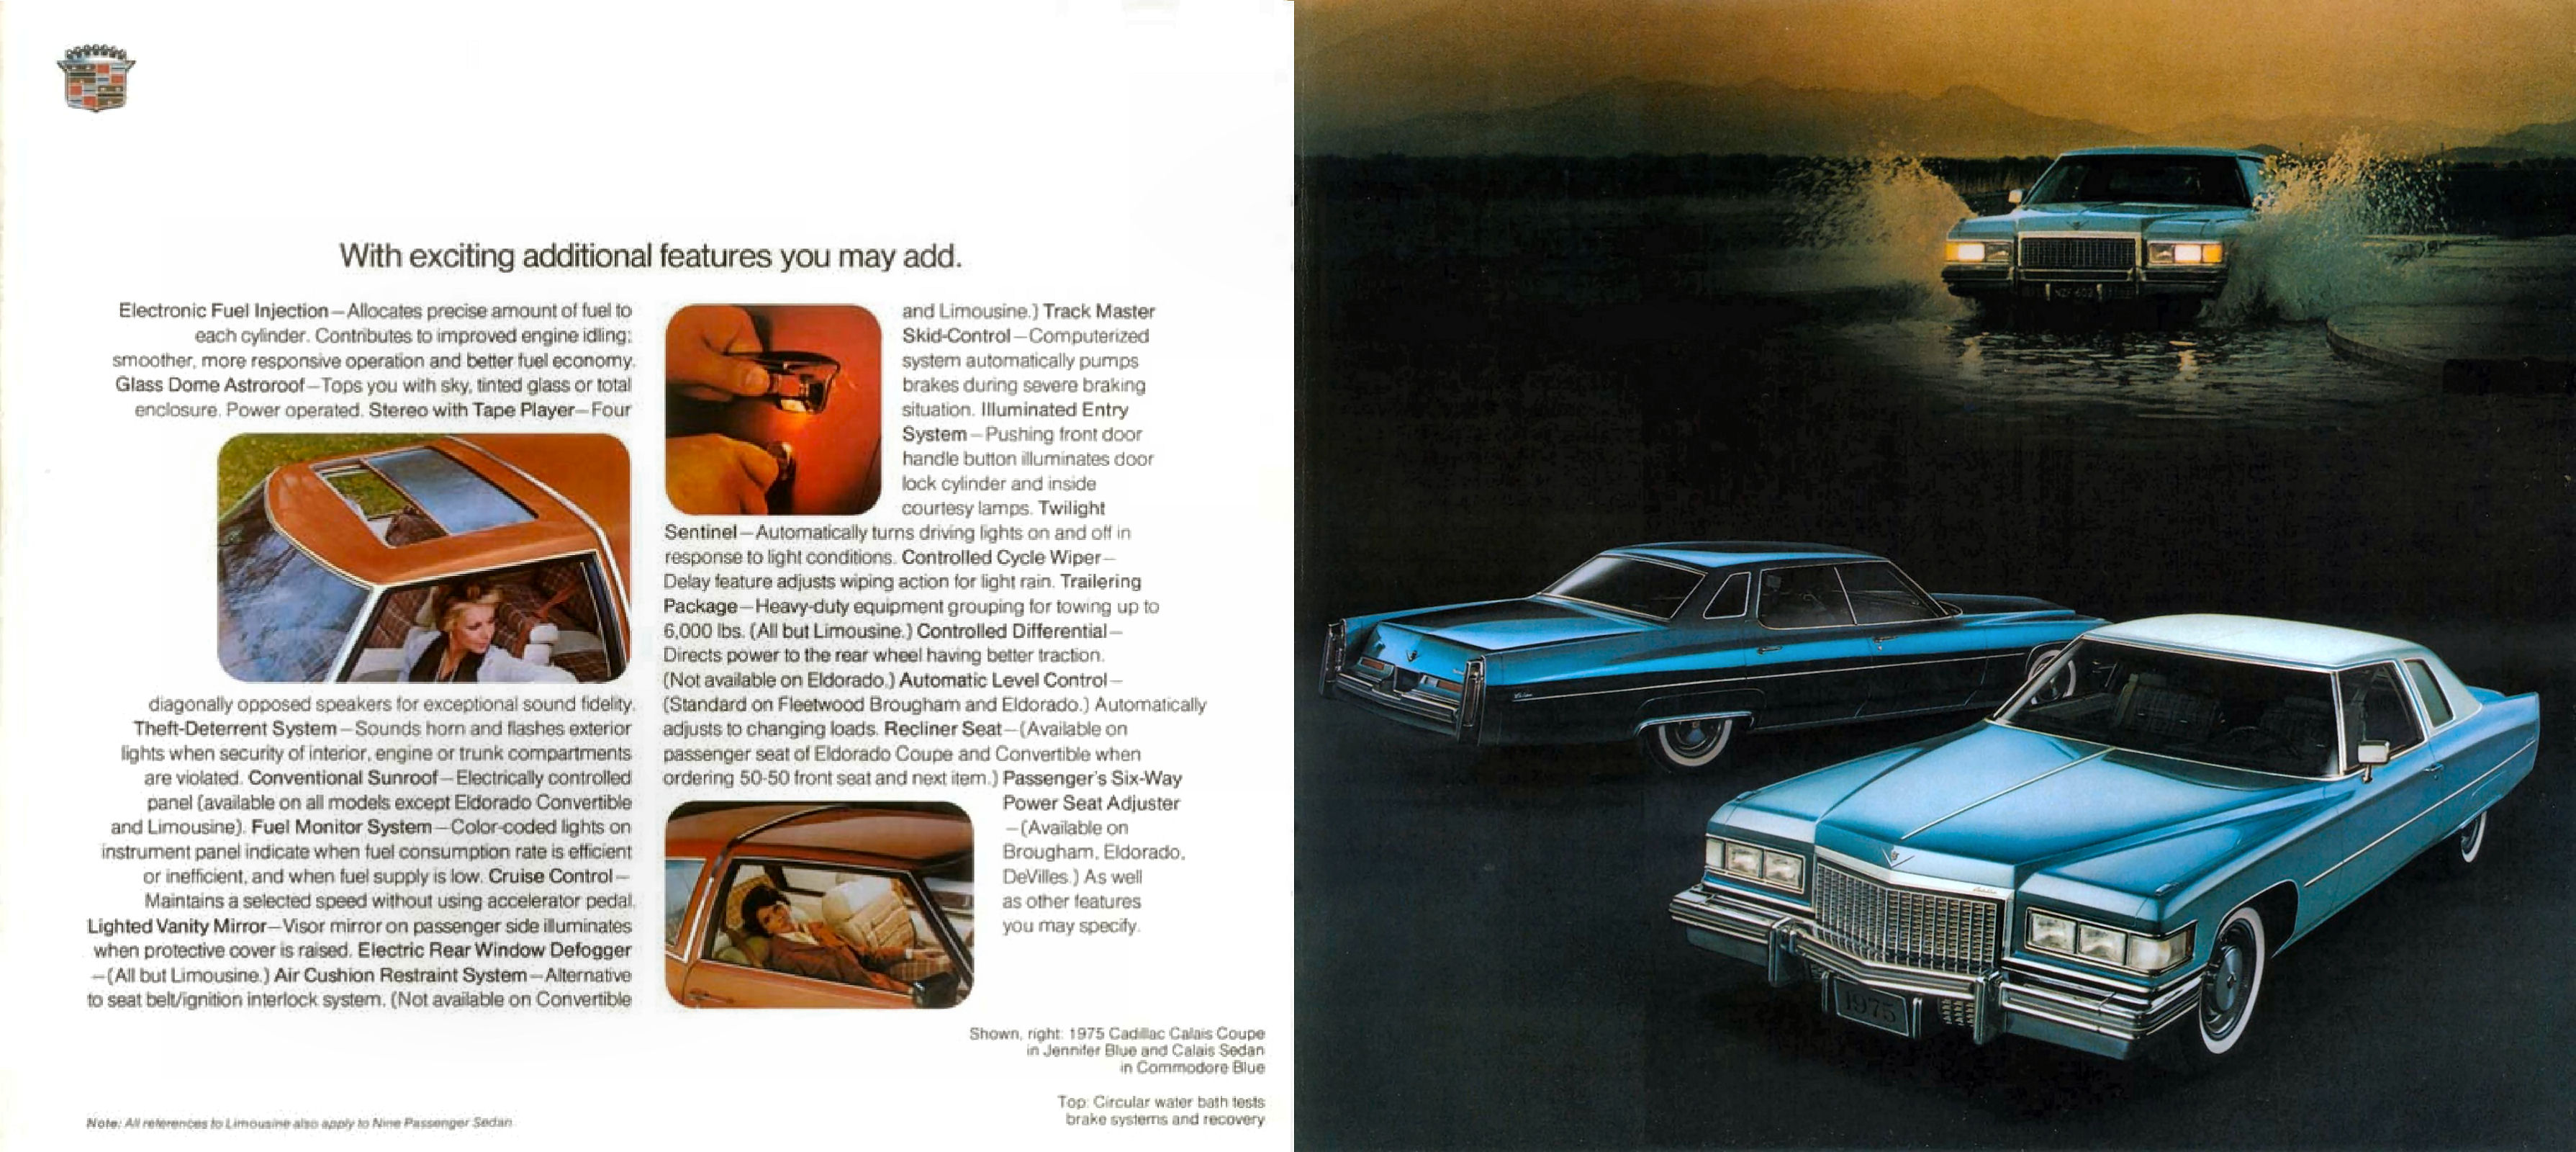 1975 Cadillac Then _ Now Mailer-08-09